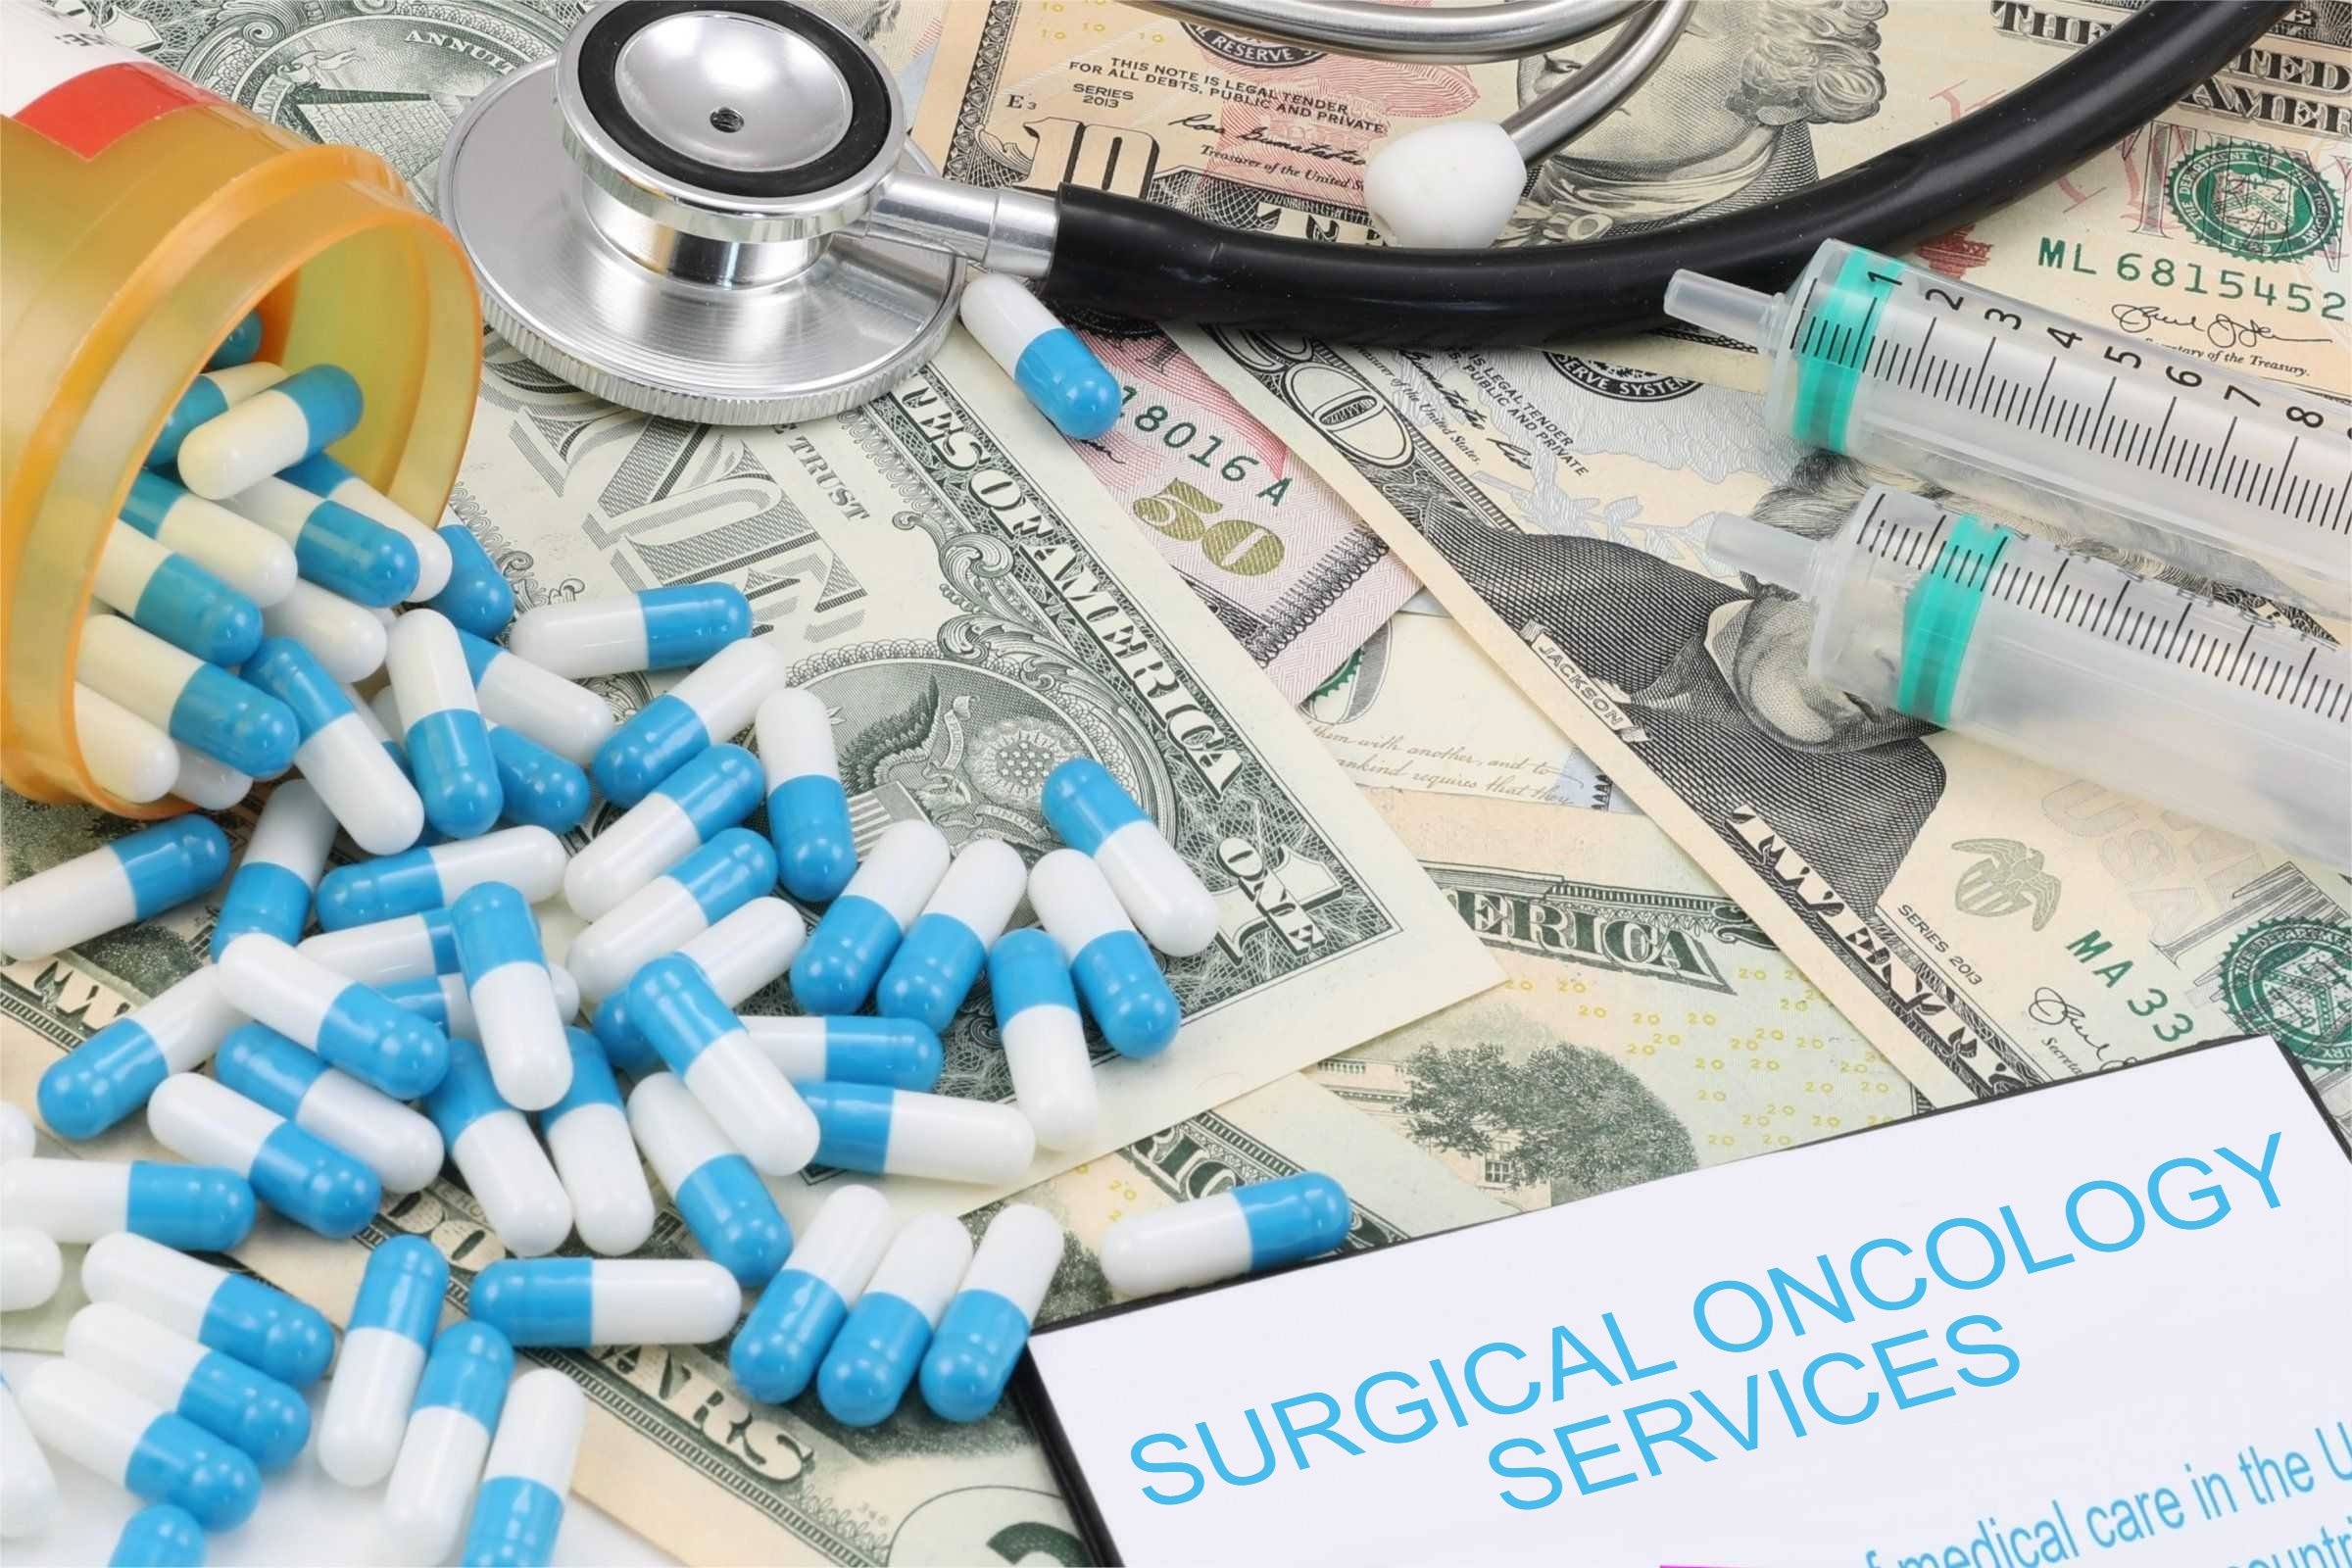 surgical oncology services